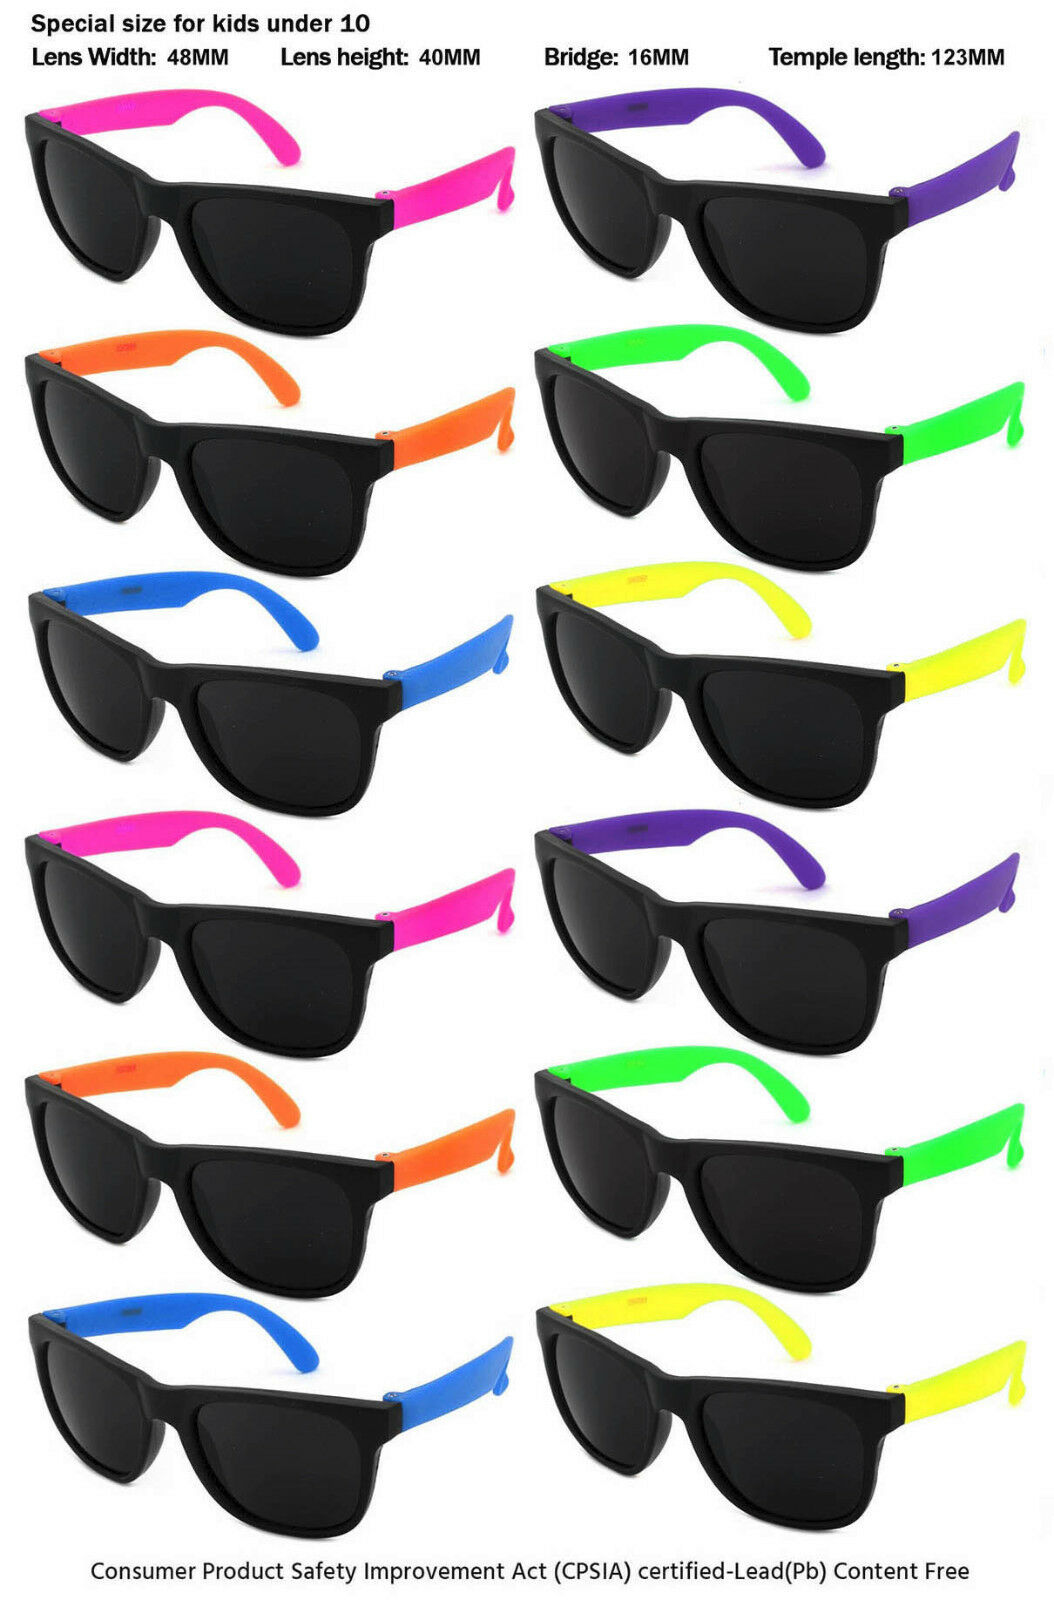 12 Pack Kids Size Neon Sunglasses W/cpsia Certified-lead(pb) Content Free 9402r